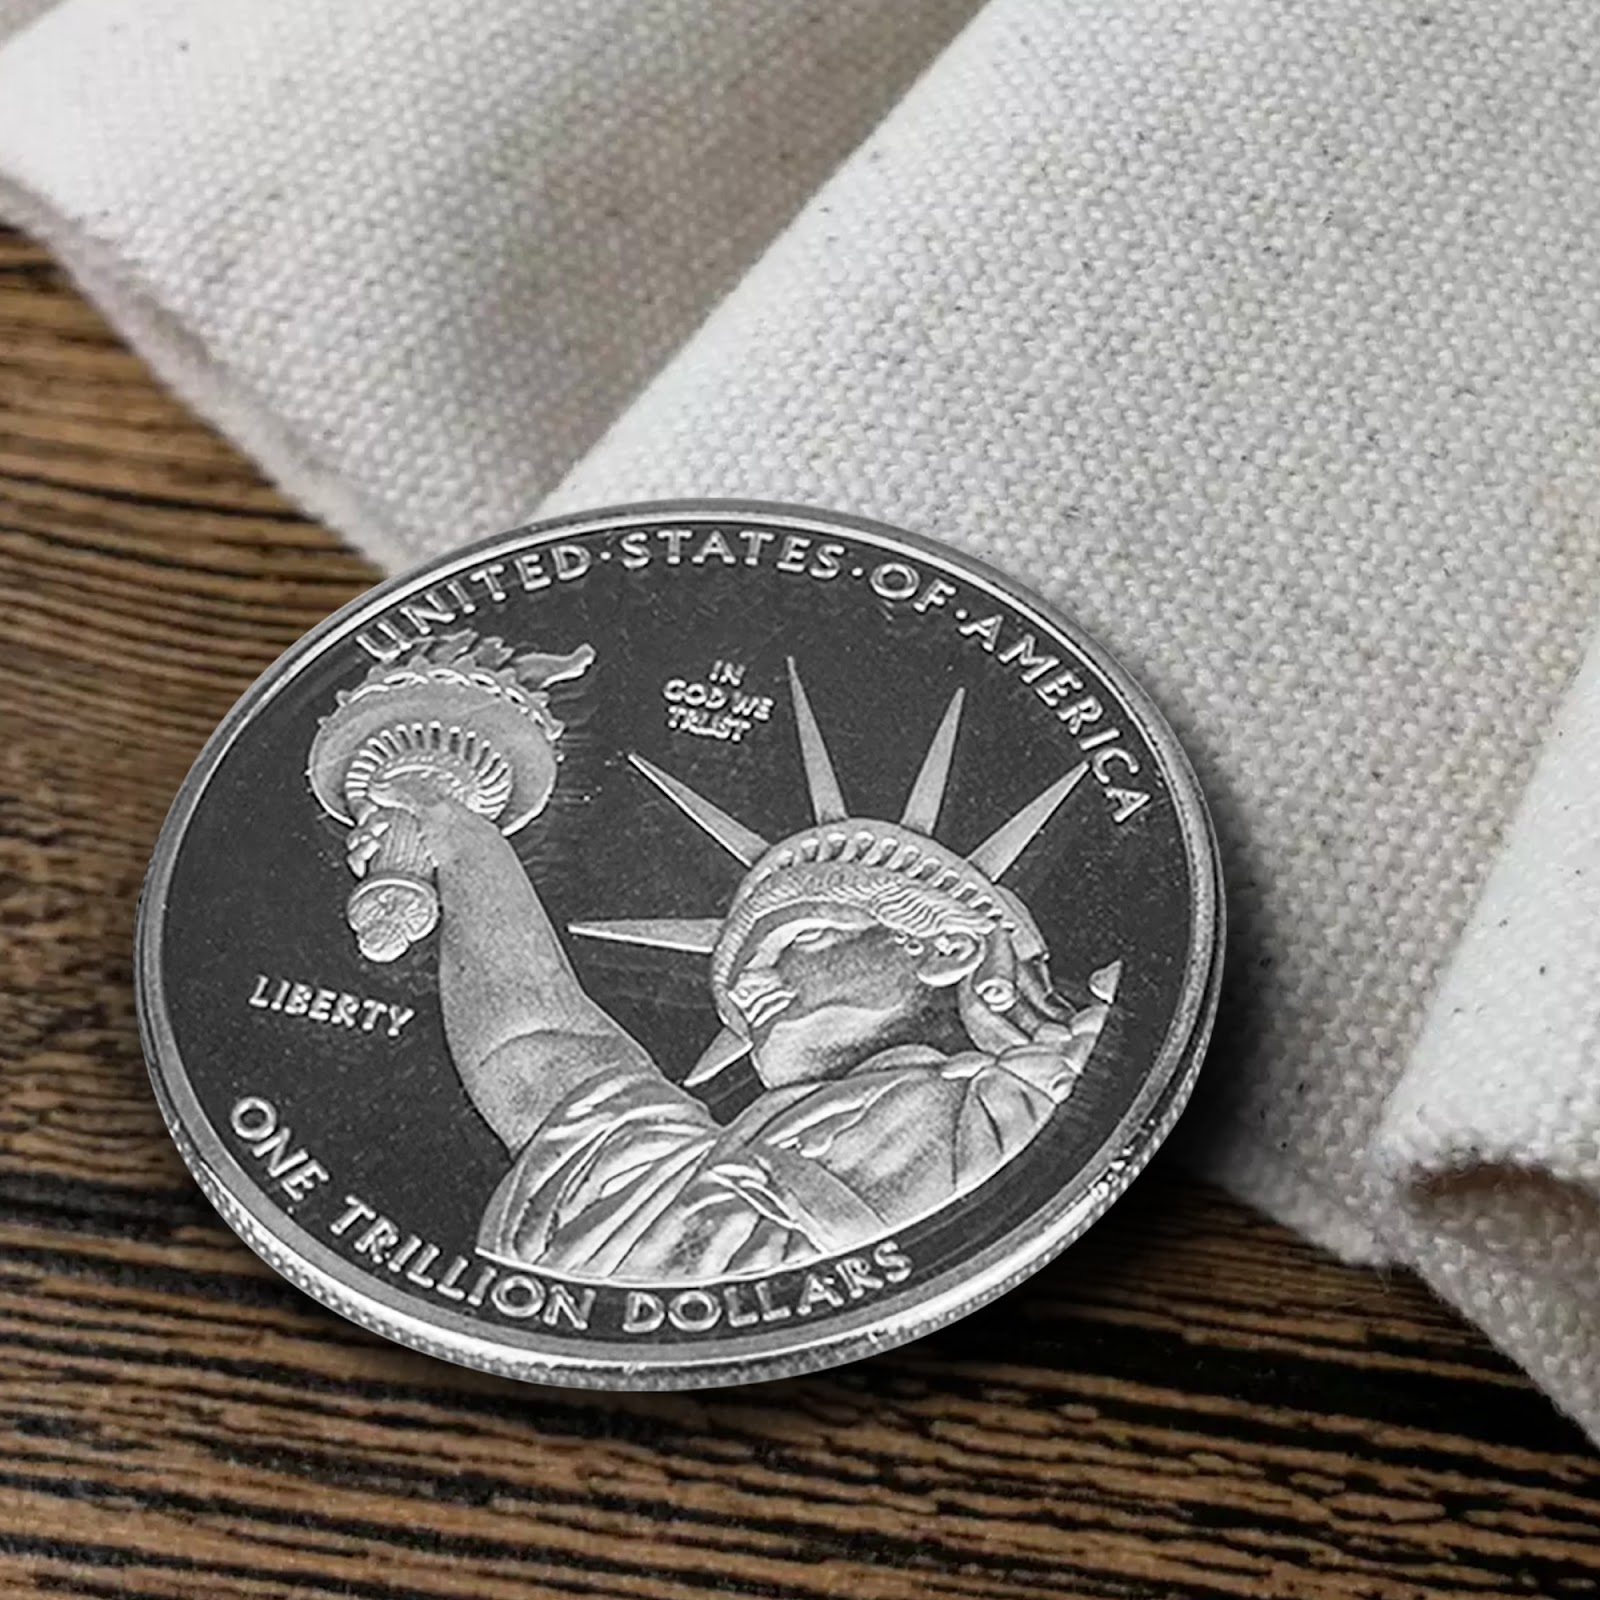 1 Trillion Dollar Silver plated United States Metal Coin